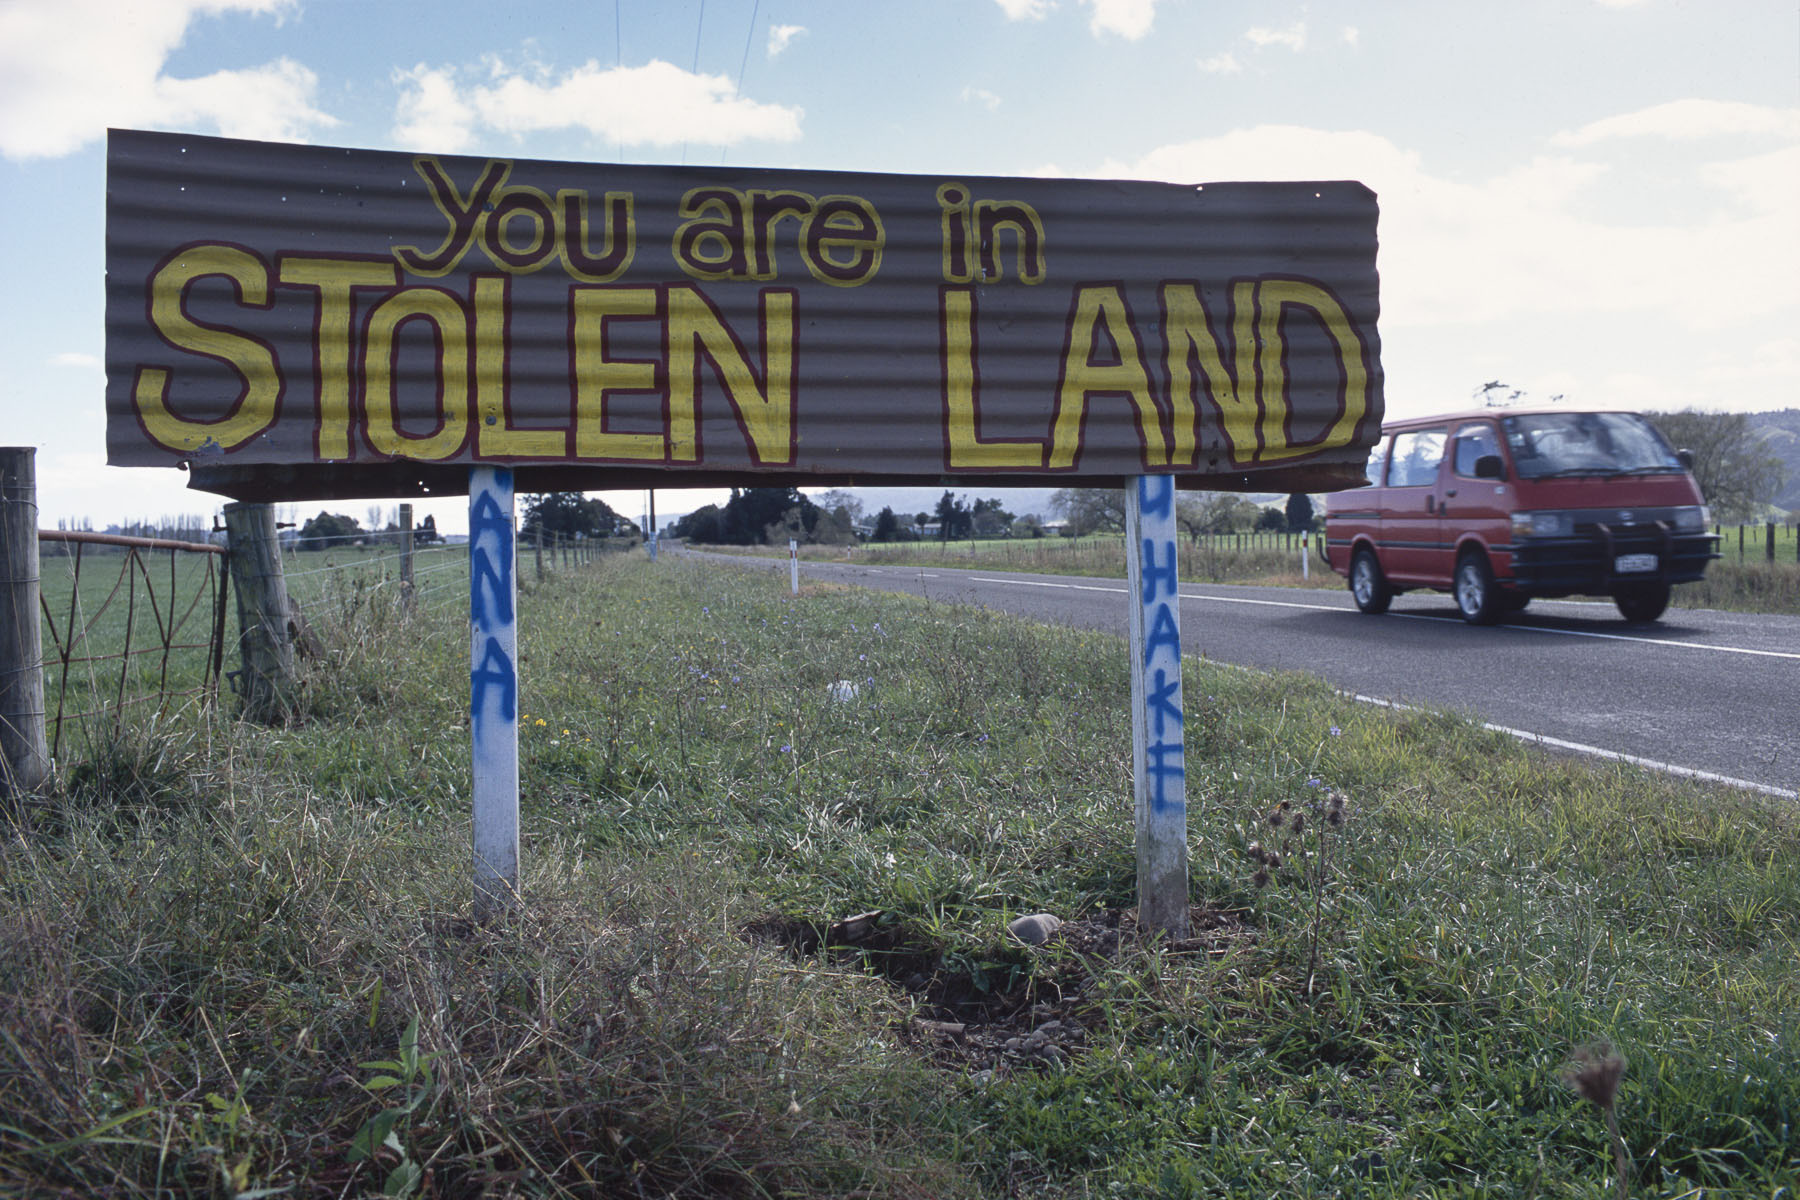 Territorial claims signs posed by Maori radical activists in May 2000